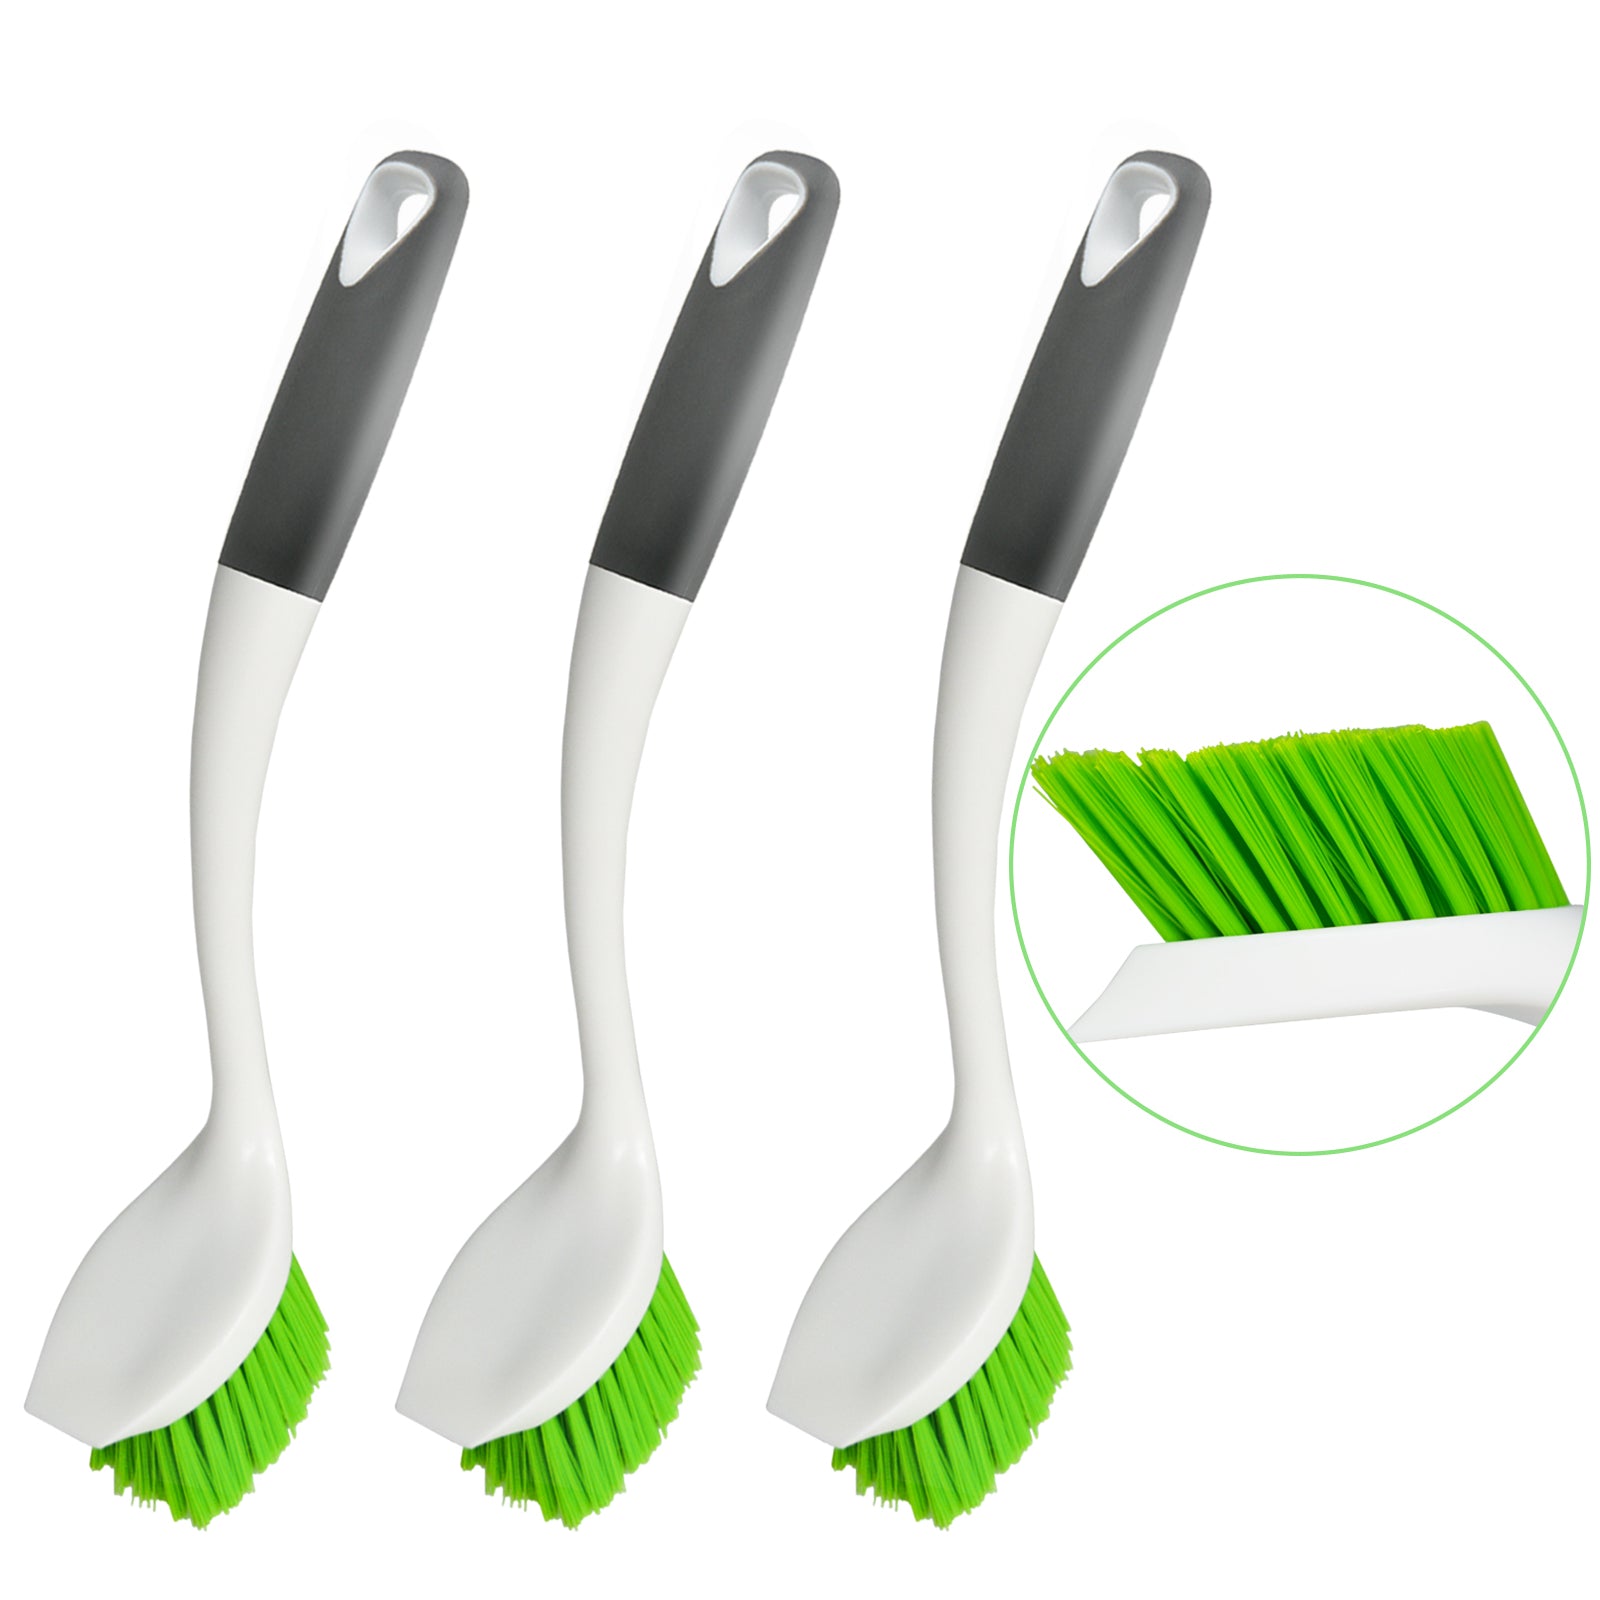 Dish Brush Replacement Head, Brushes Cleaning Dishes